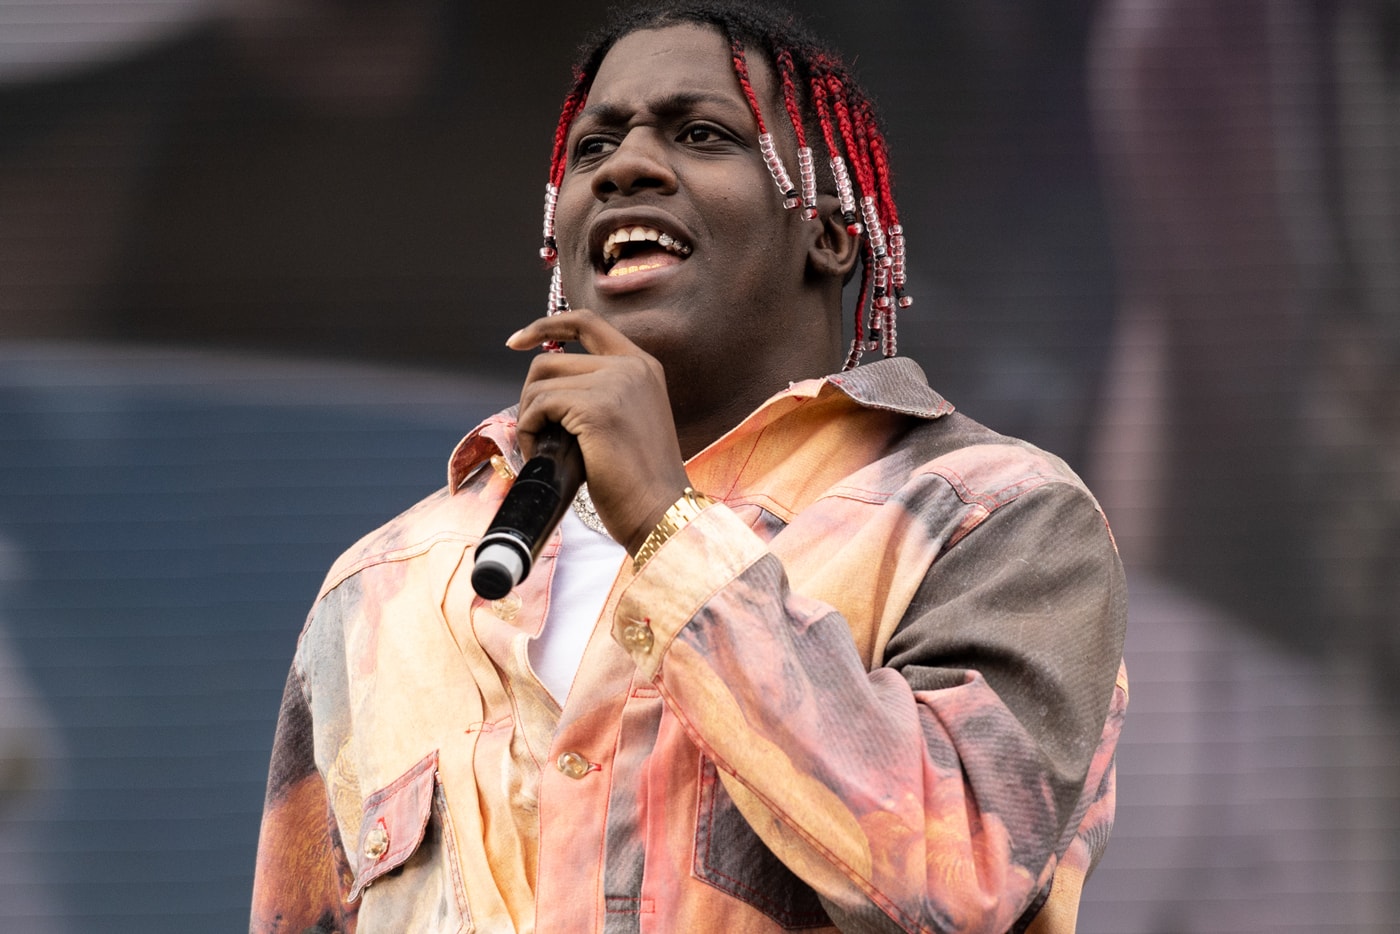 Lil yachty Lil Pump Collaboration Snippet Twitter Shared